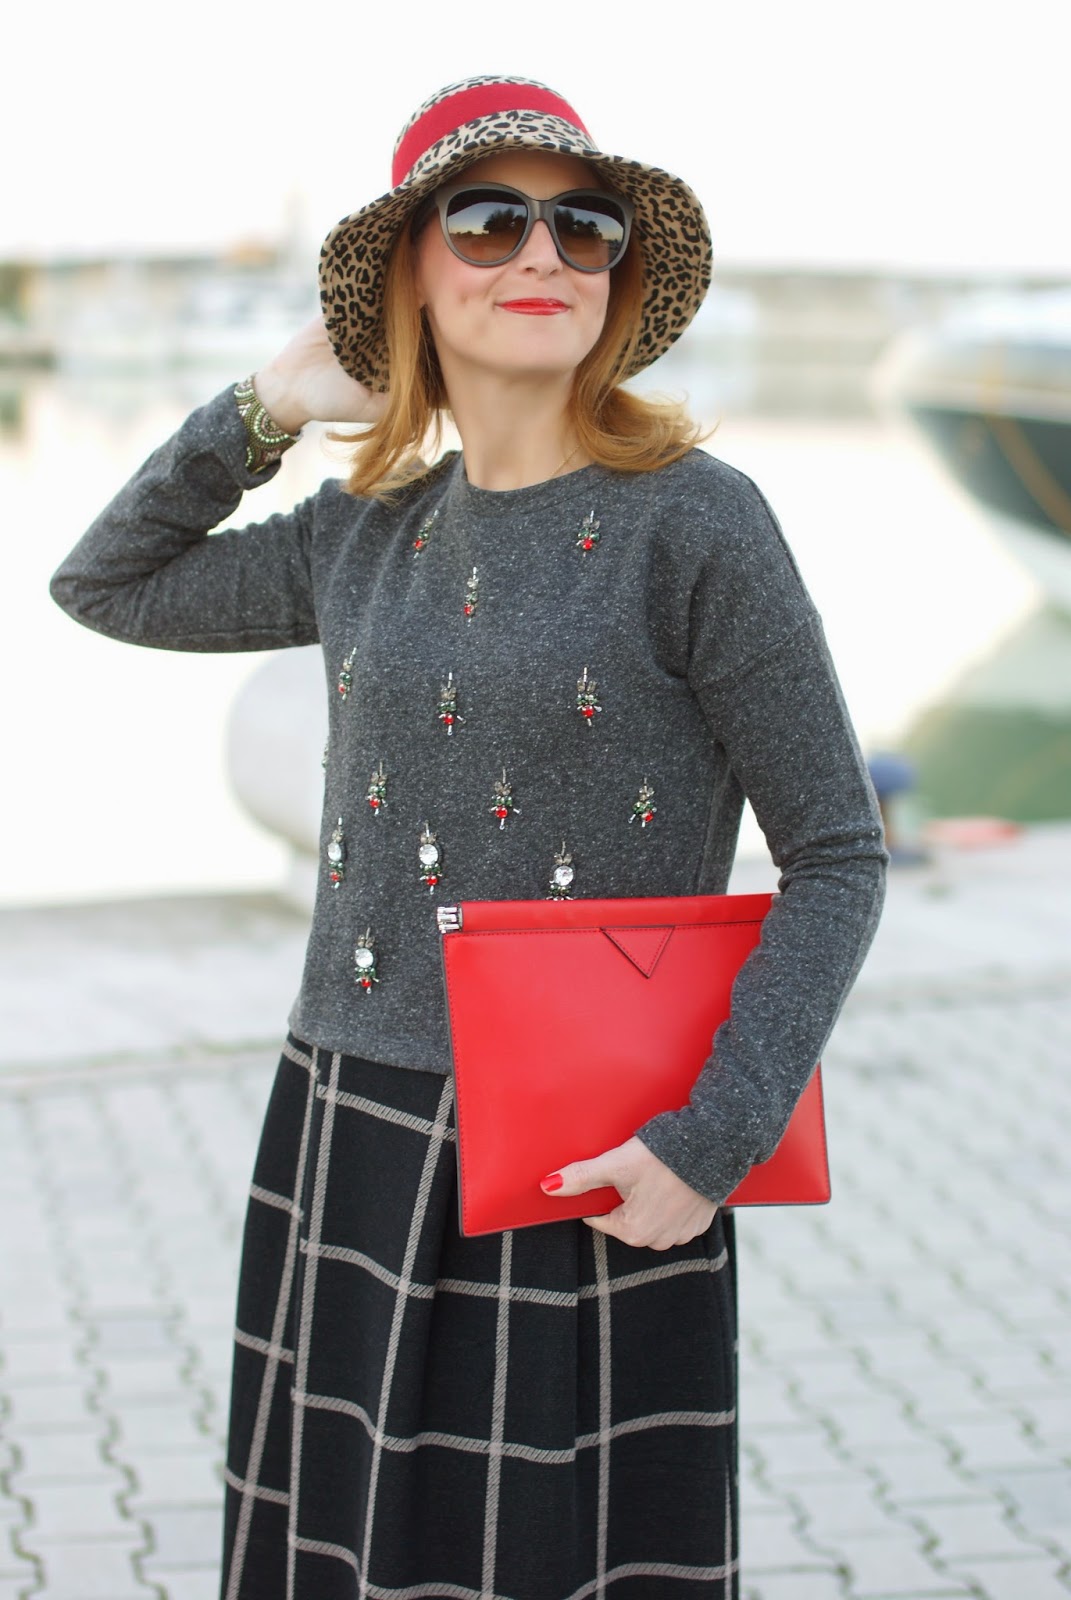 Embellished sweater, leopard print hat | Fashion and Cookies - fashion ...